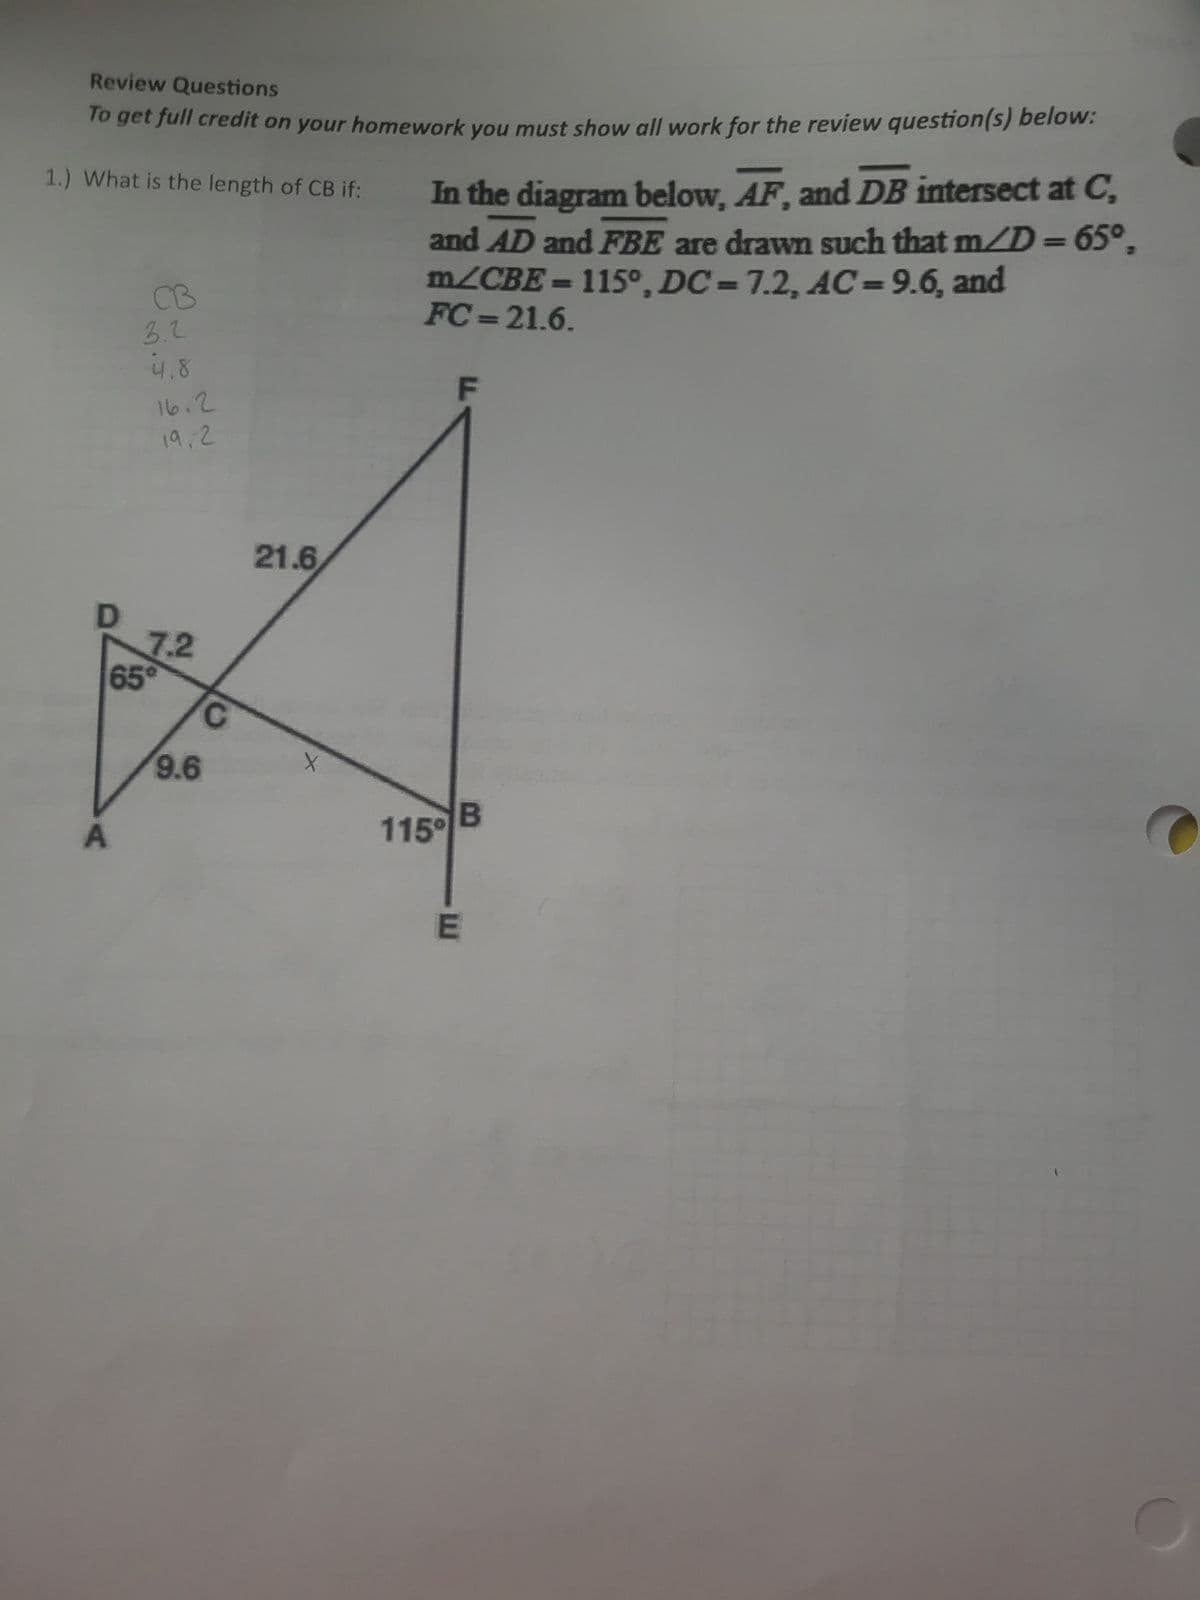 Review Questions
To get full credit on your homework you must show all work for the review question(s) below:
1.) What is the length of CB if:
In the diagram below, AF, and DB intersect at C,
and AD and FBE are drawn such that m/D = 65°,
m/CBE = 115°, DC-7.2, AC-9.6, and
FC-21.6.
CB
3.2
4.8
16.2
F
19,2
21.6
7.2
65°
C
X
9.6
115°
A
E
B
C